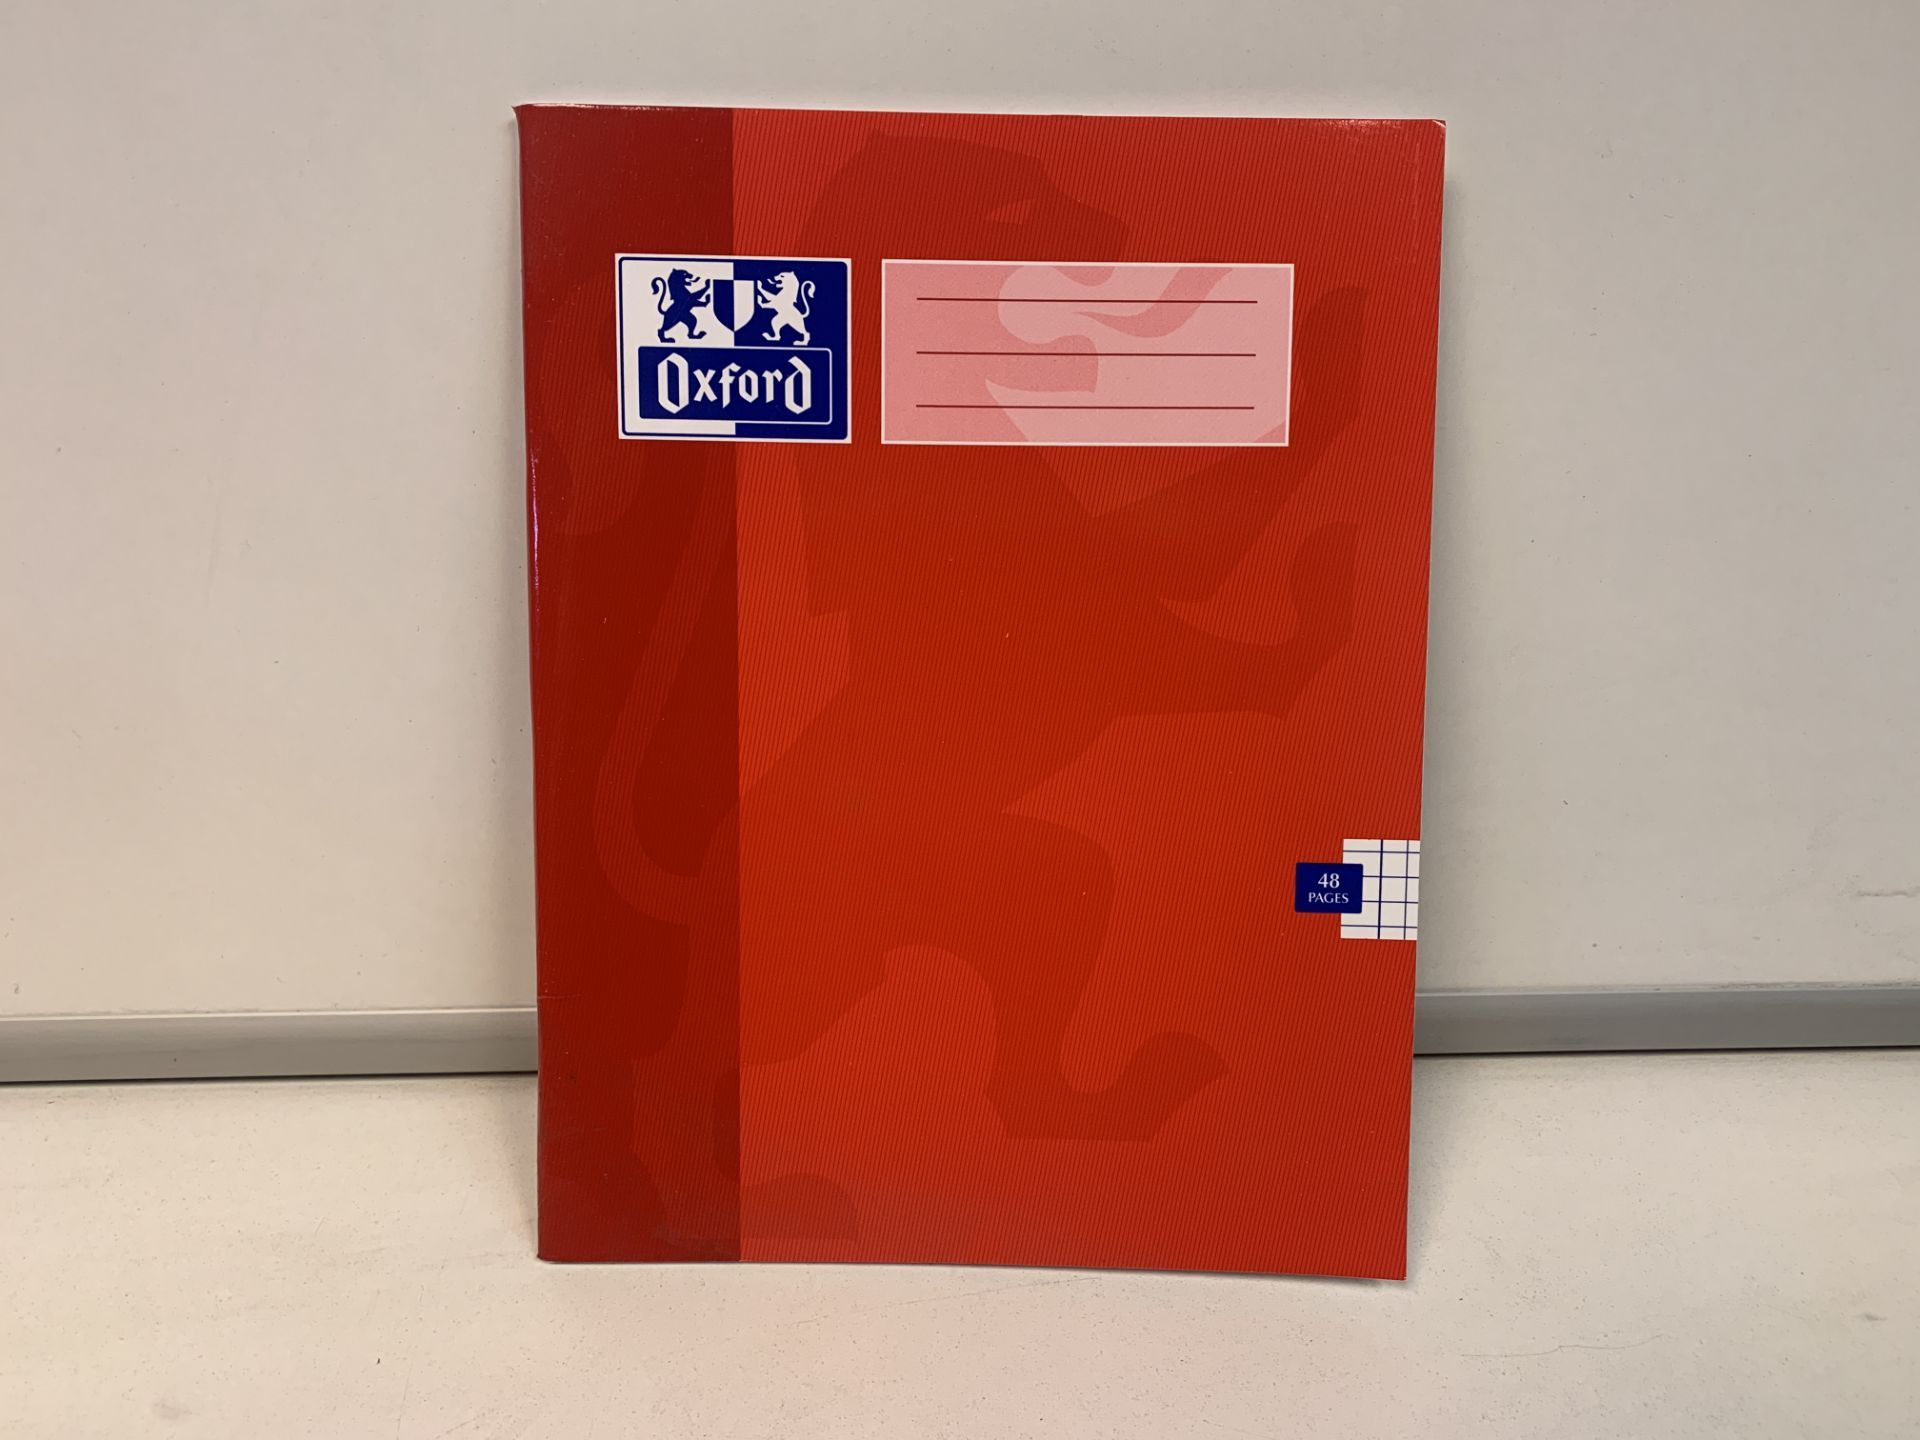 200 X BRAND NEW OXFORD 48 PAGE EXERCISE NOTE BOOKS R15